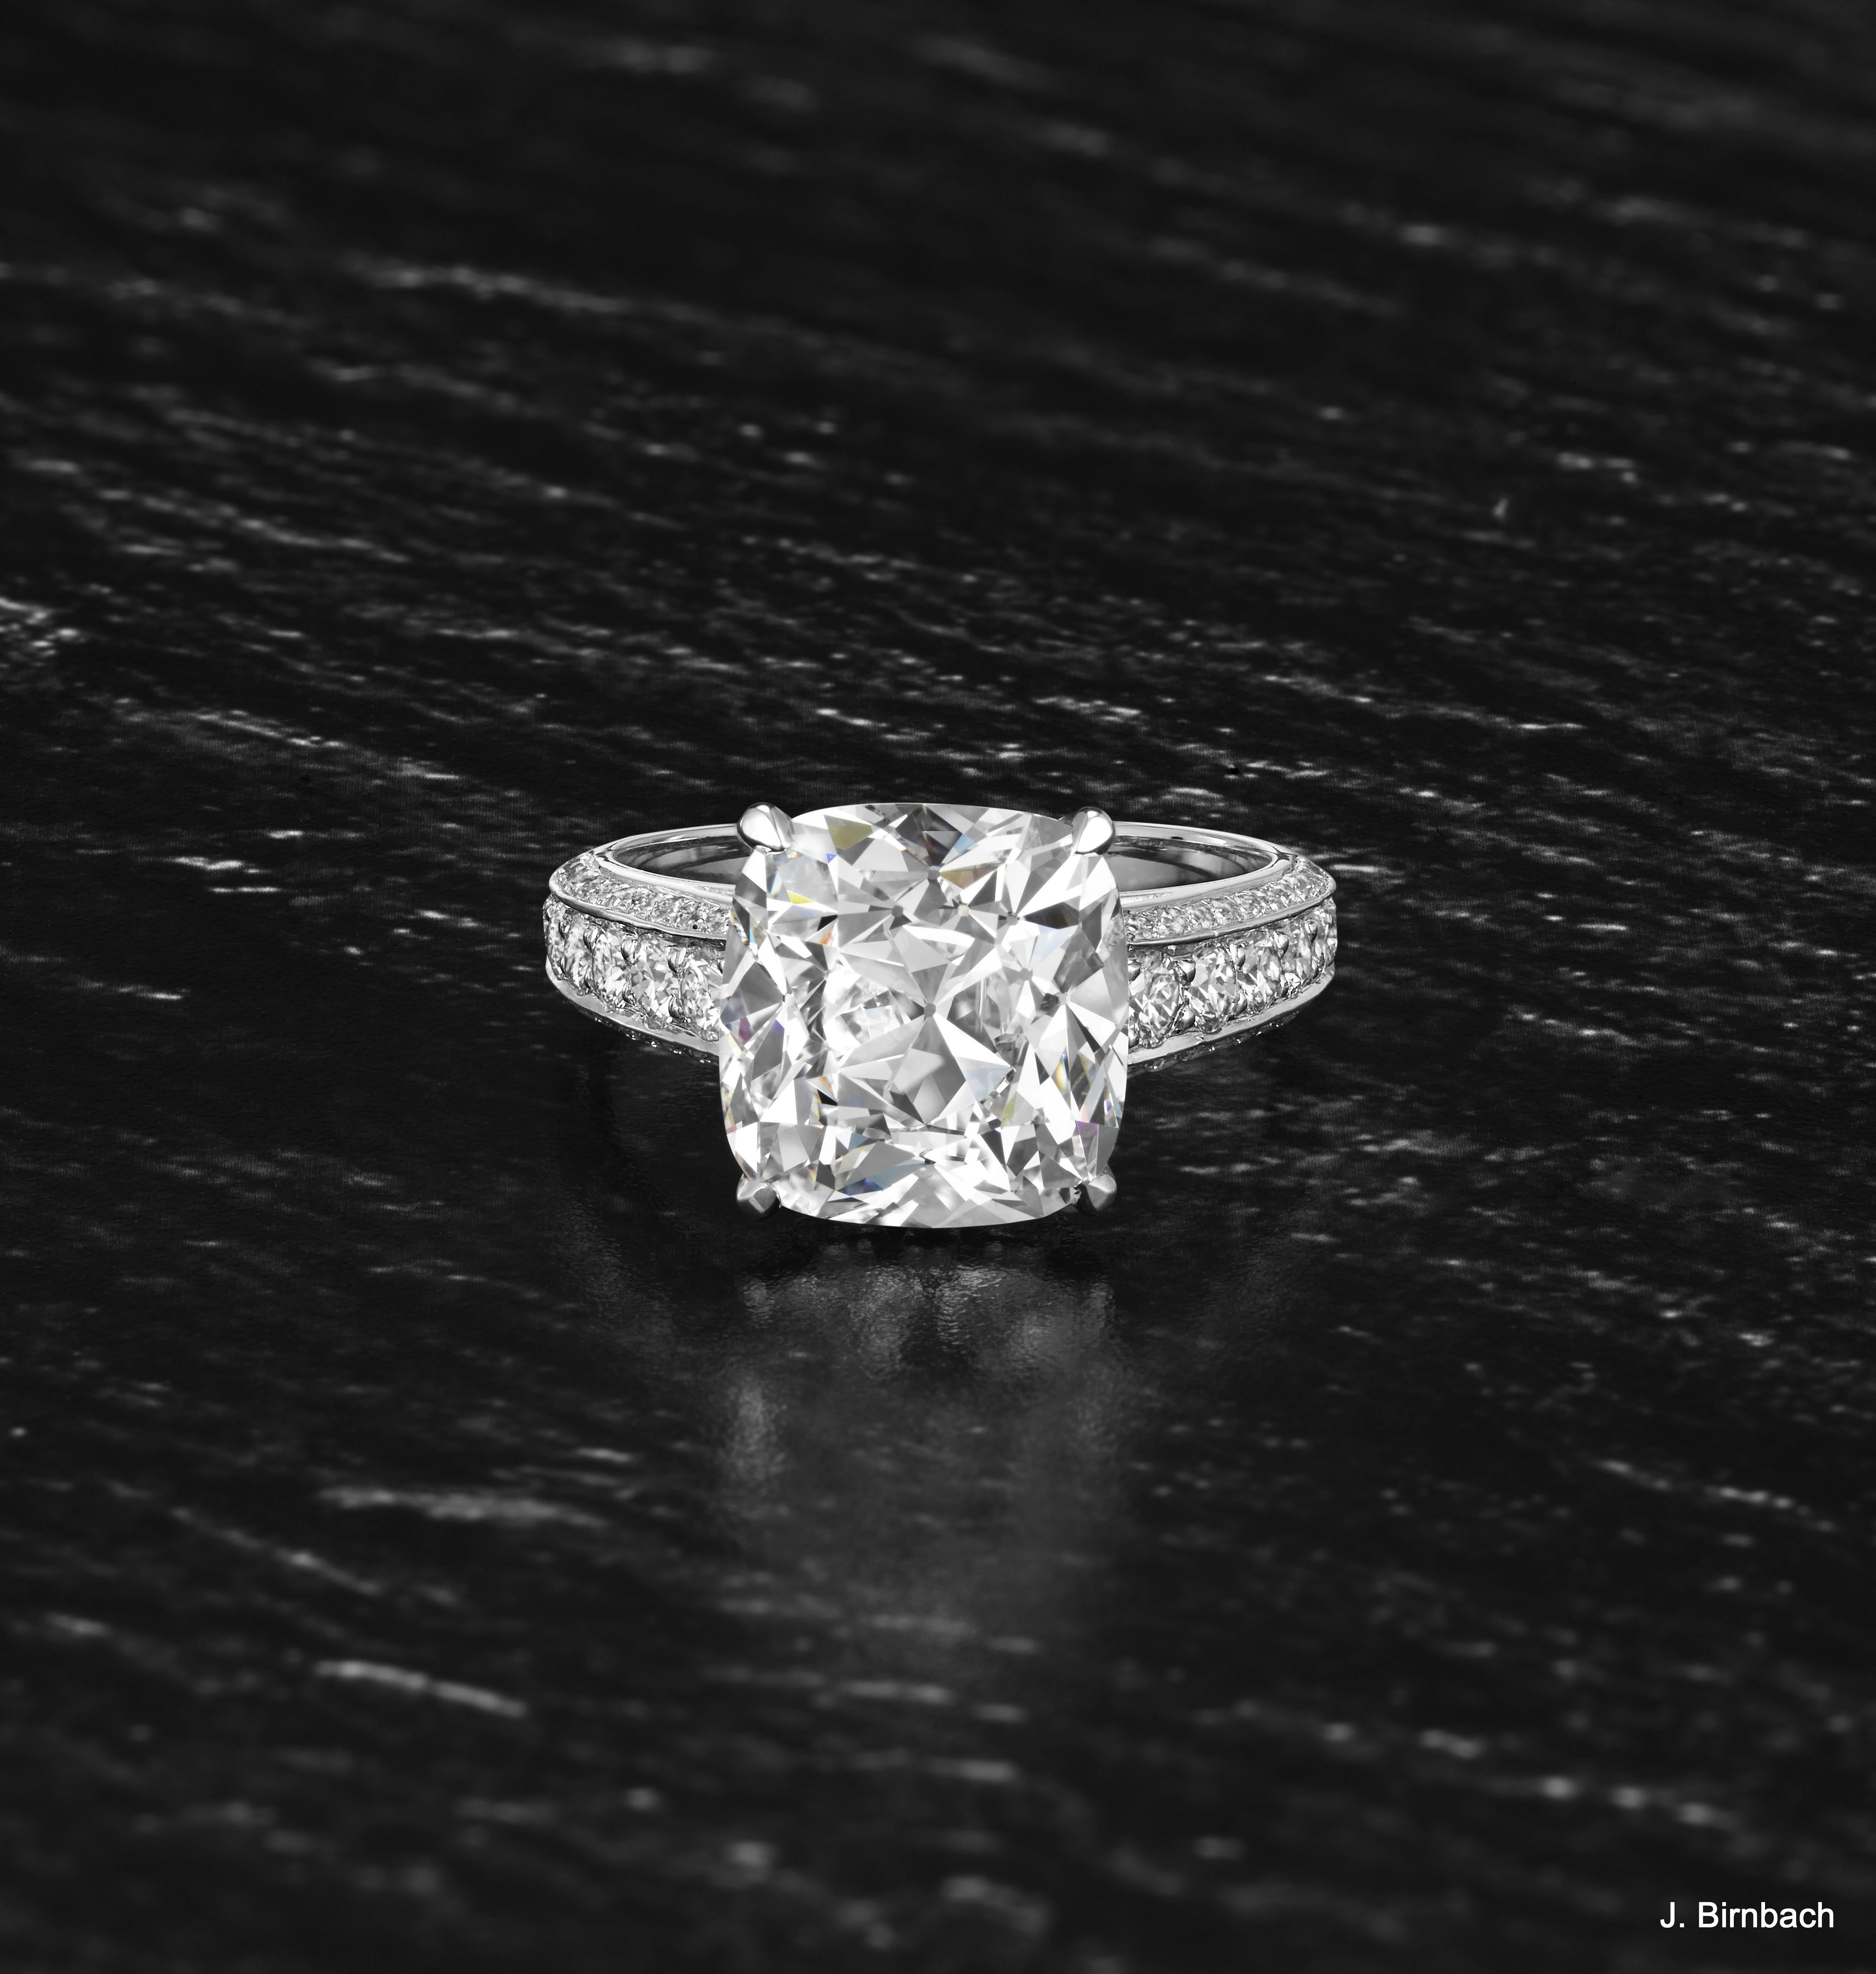 This stunning handmade platinum ring features a 6.06 carat cushion brilliant-cut center diamond with E color and VS1 clarity. The band contains 1.15 ctw round brilliant diamonds adorning the band on all three sides. This magnificent piece will